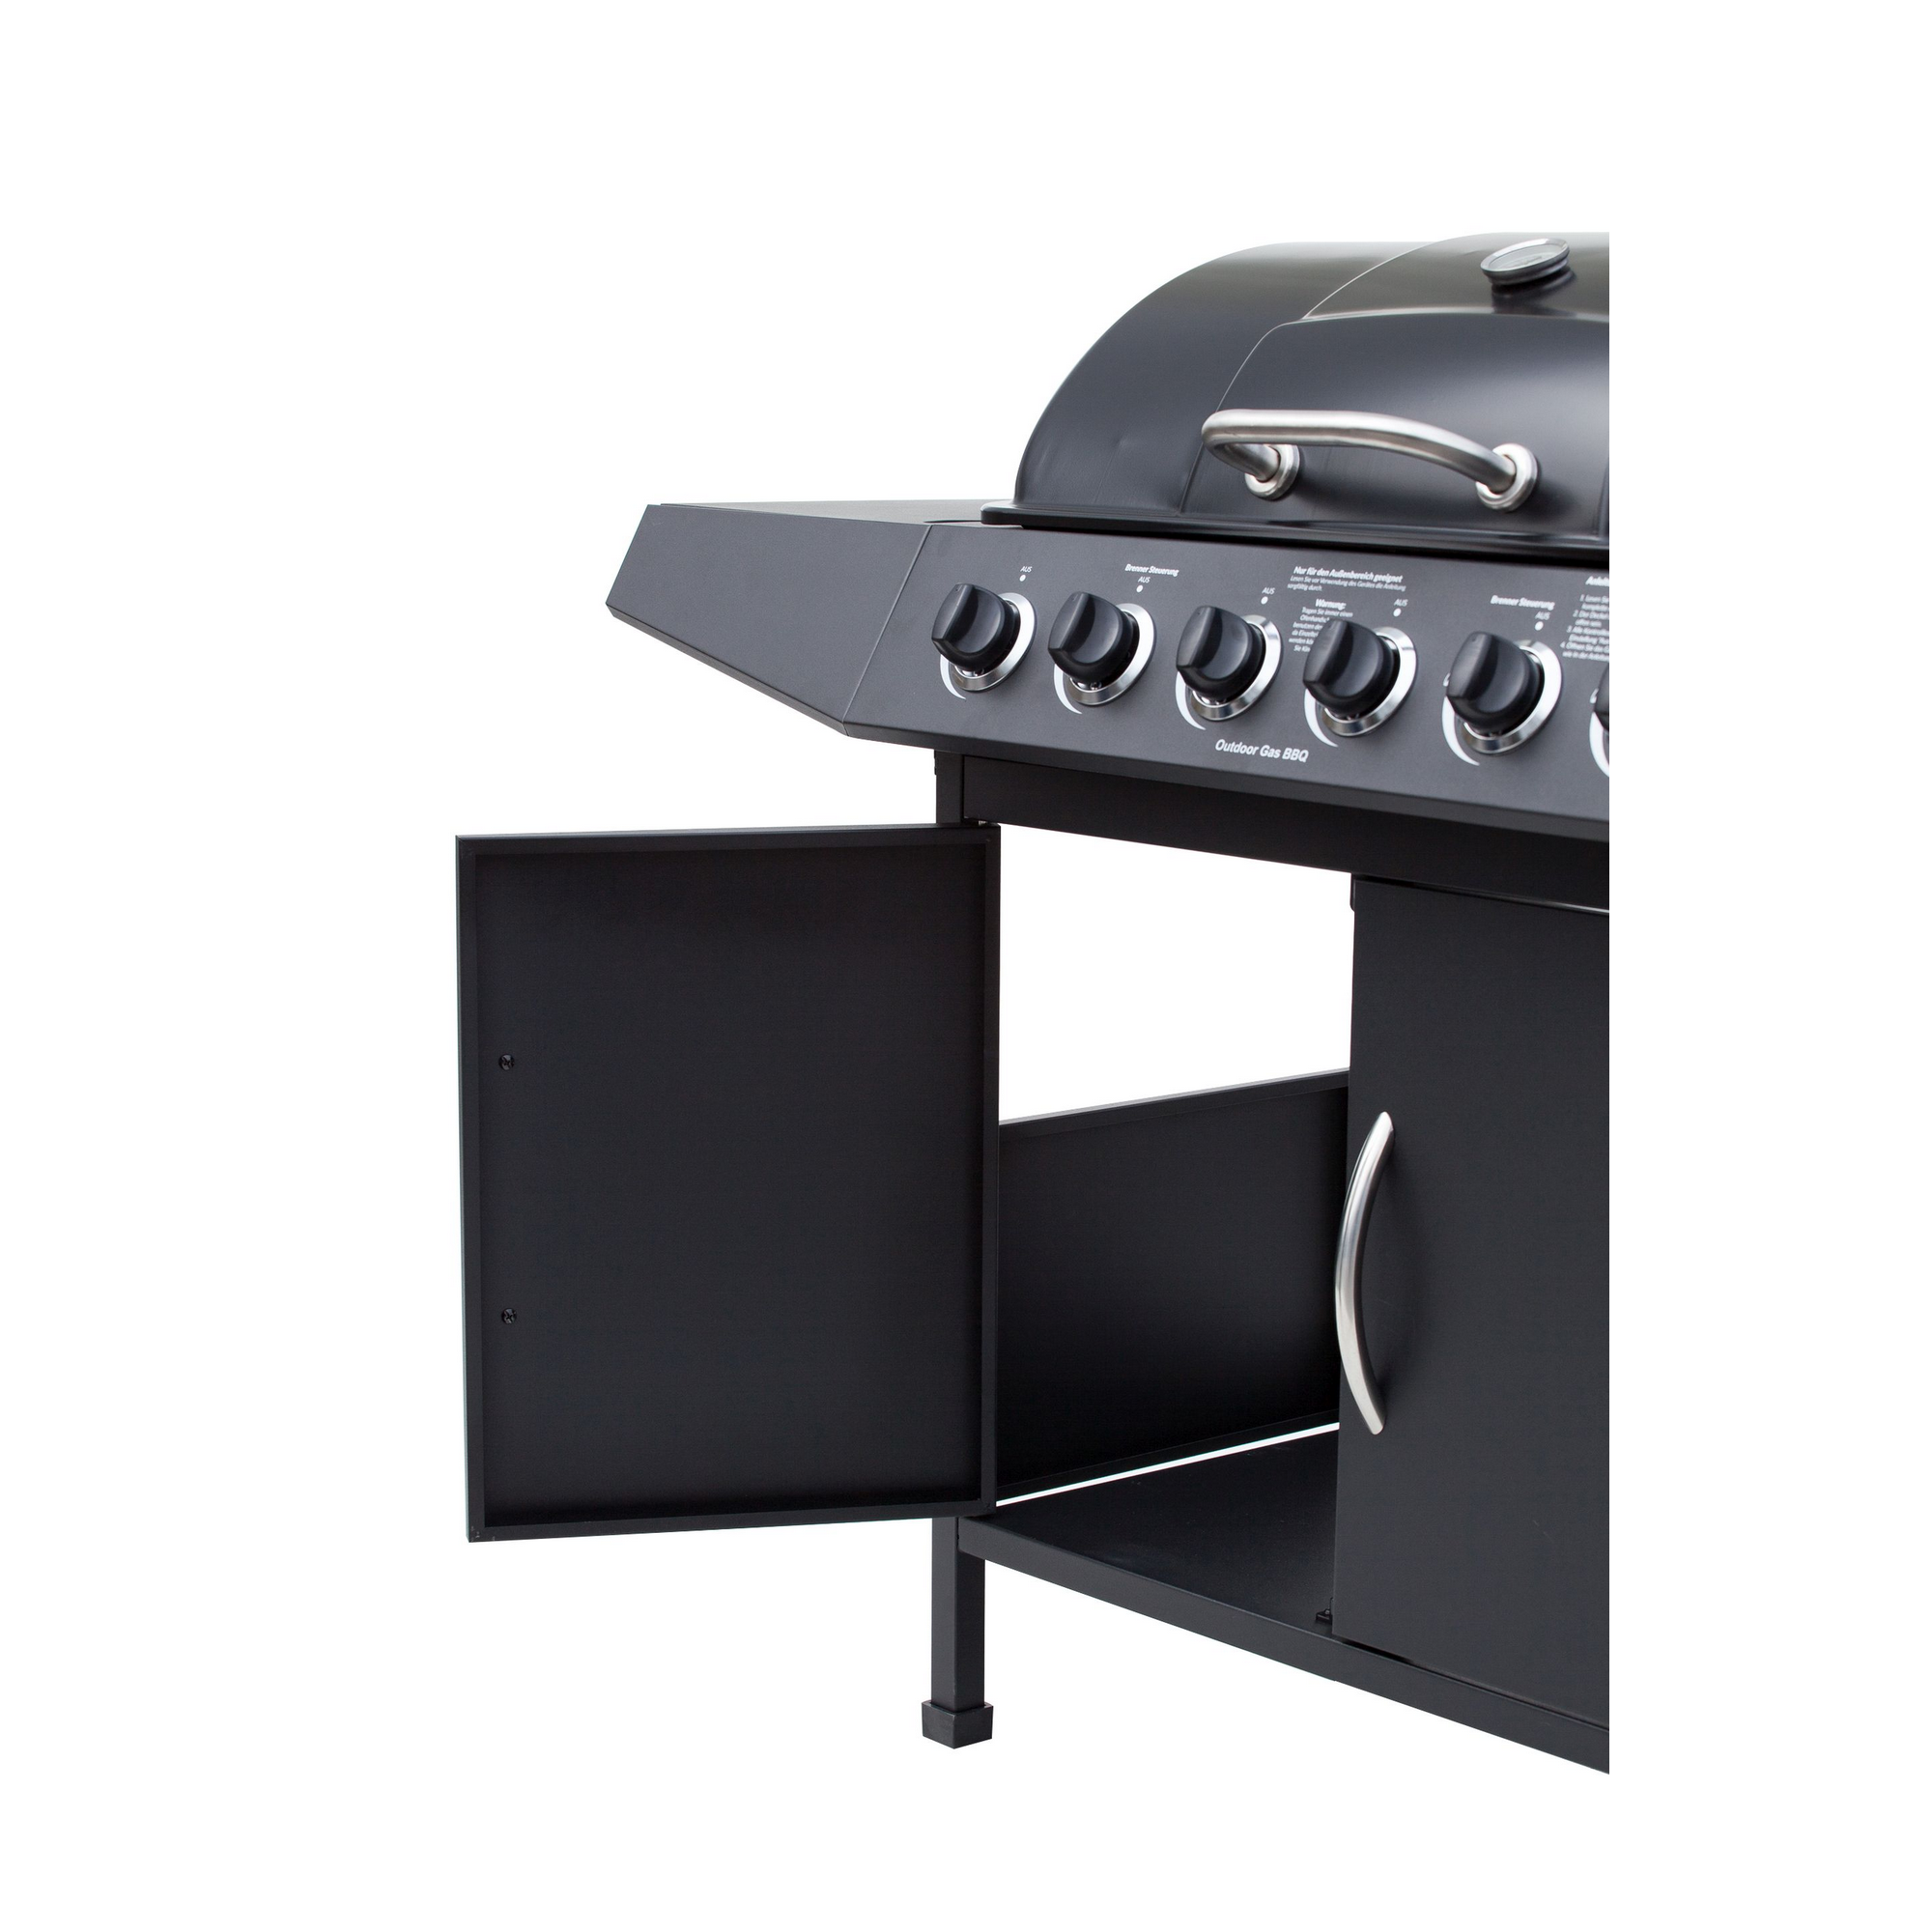 Gasgrill 'Dayton' silber 97 x 133 x 54 cm + product picture